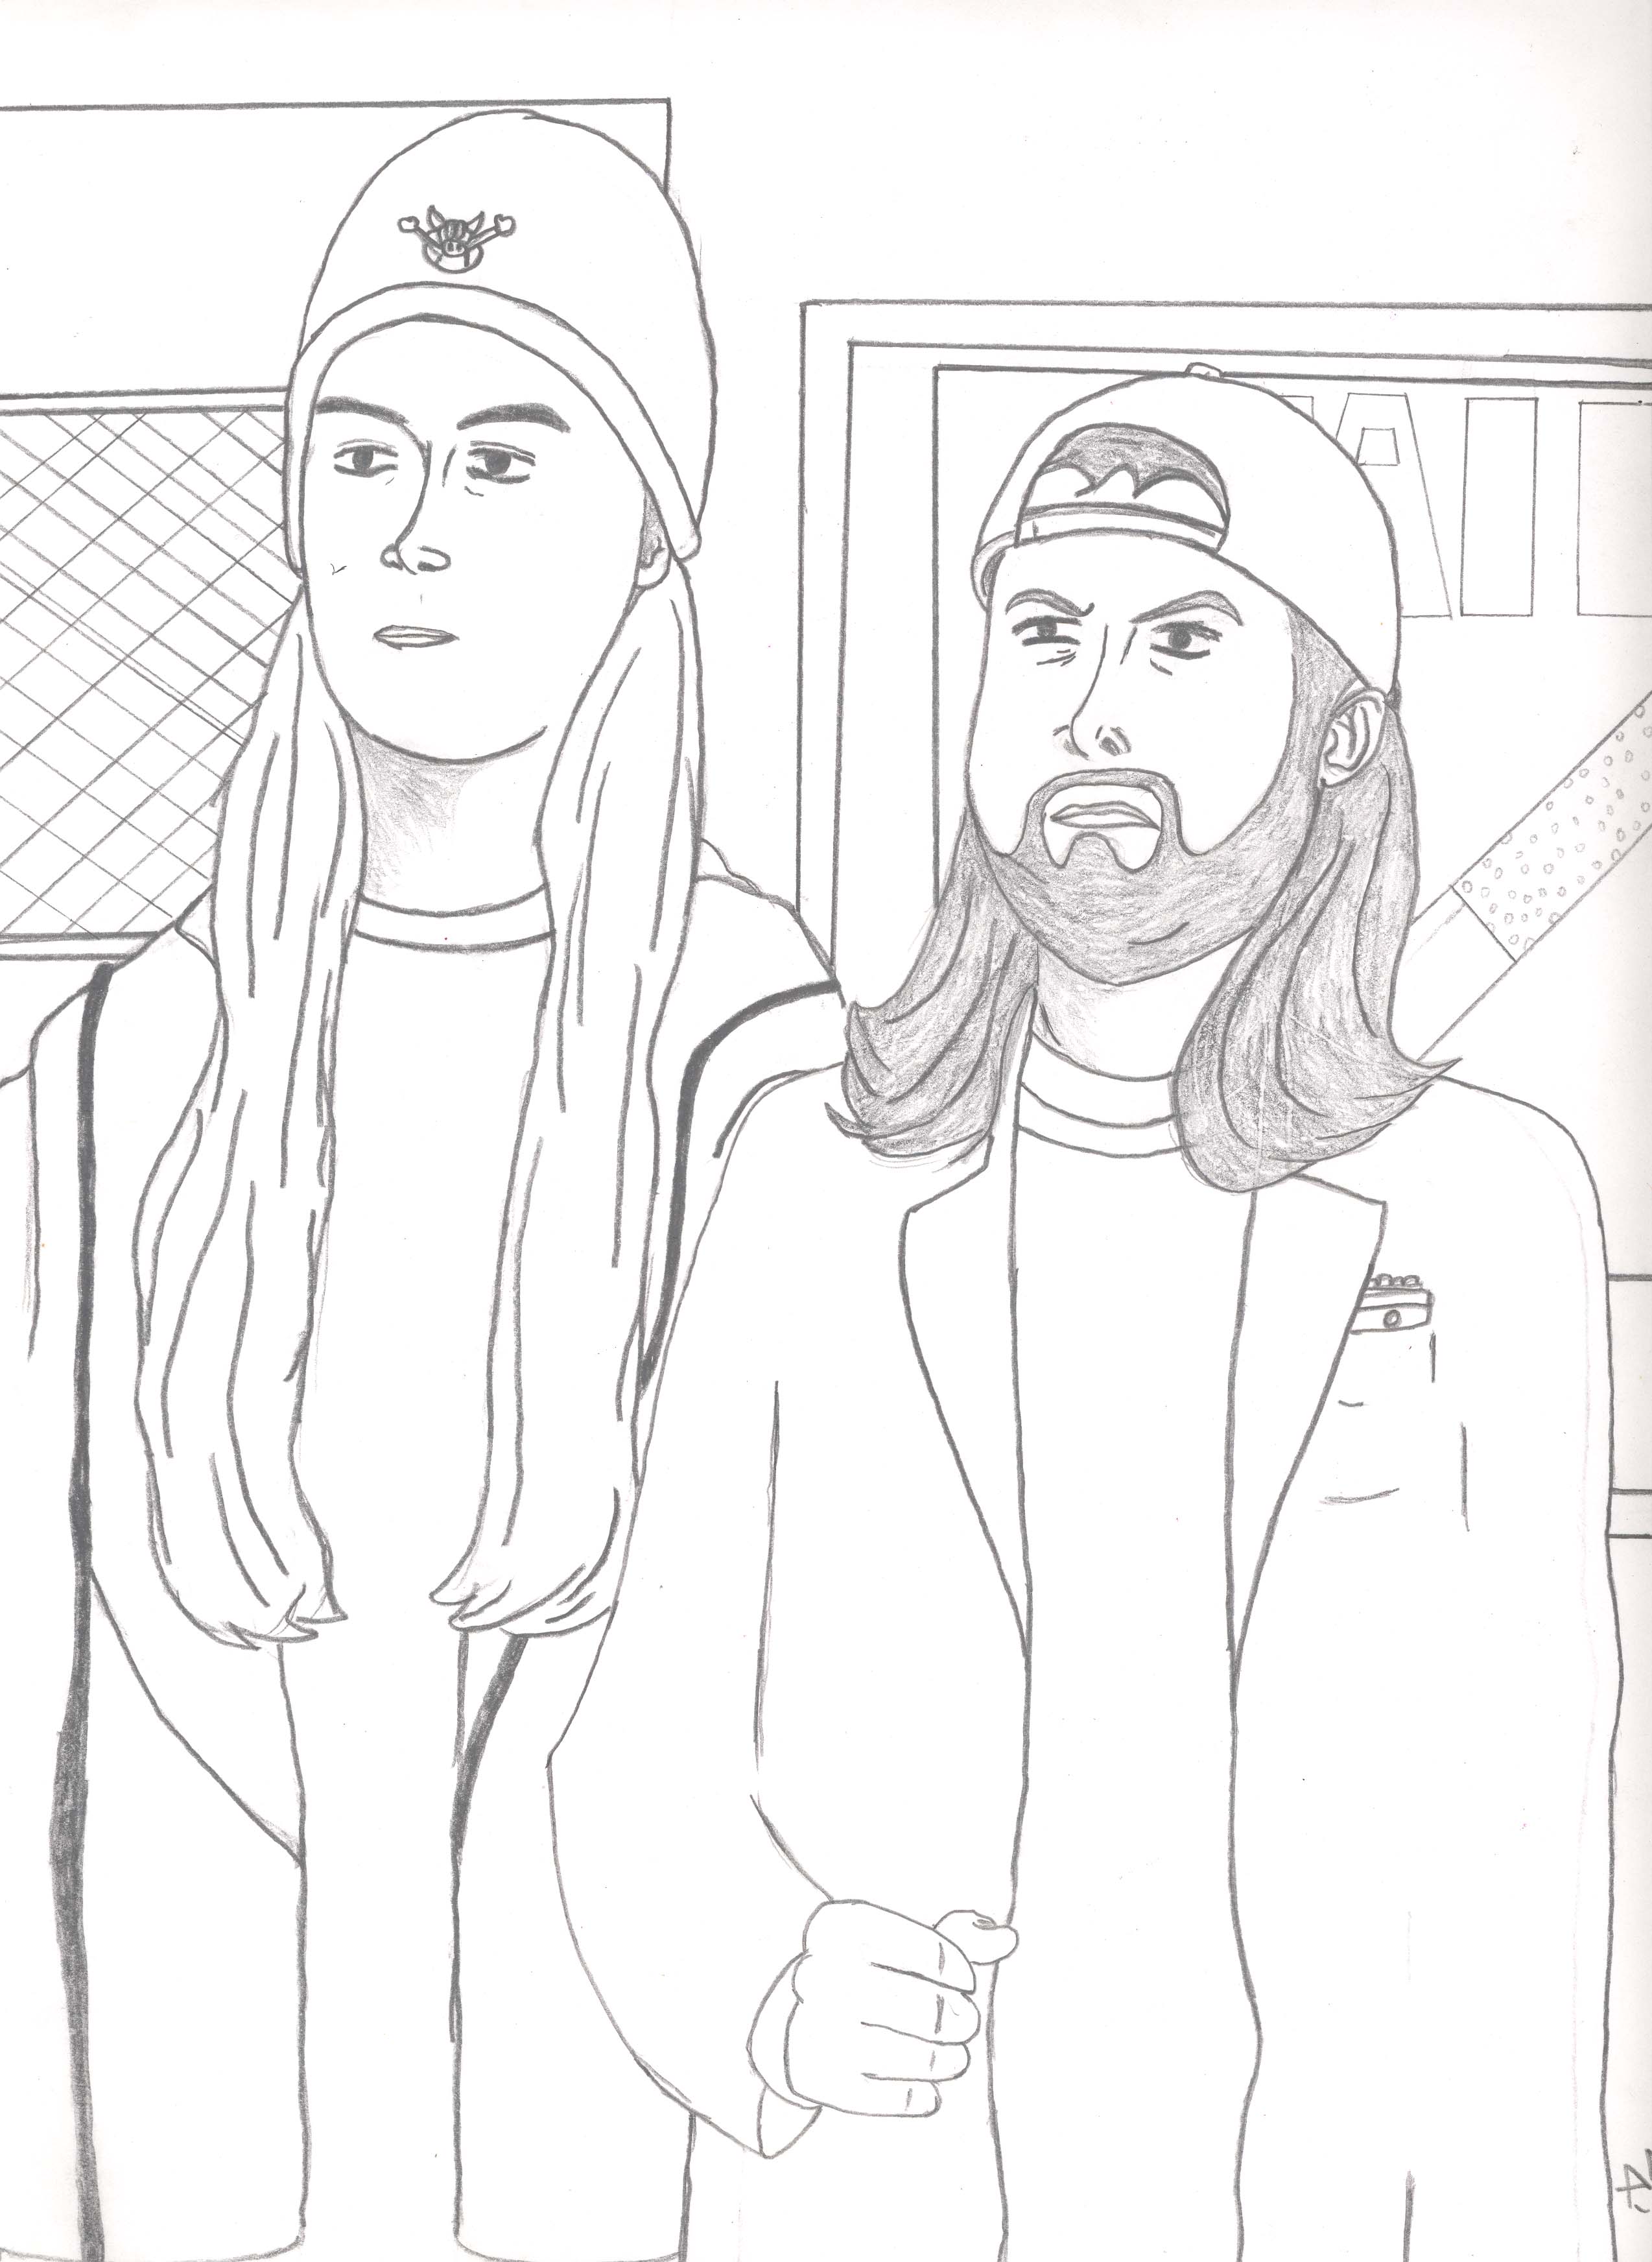 jay and silent bob at the quik stop by iluvsouthpark